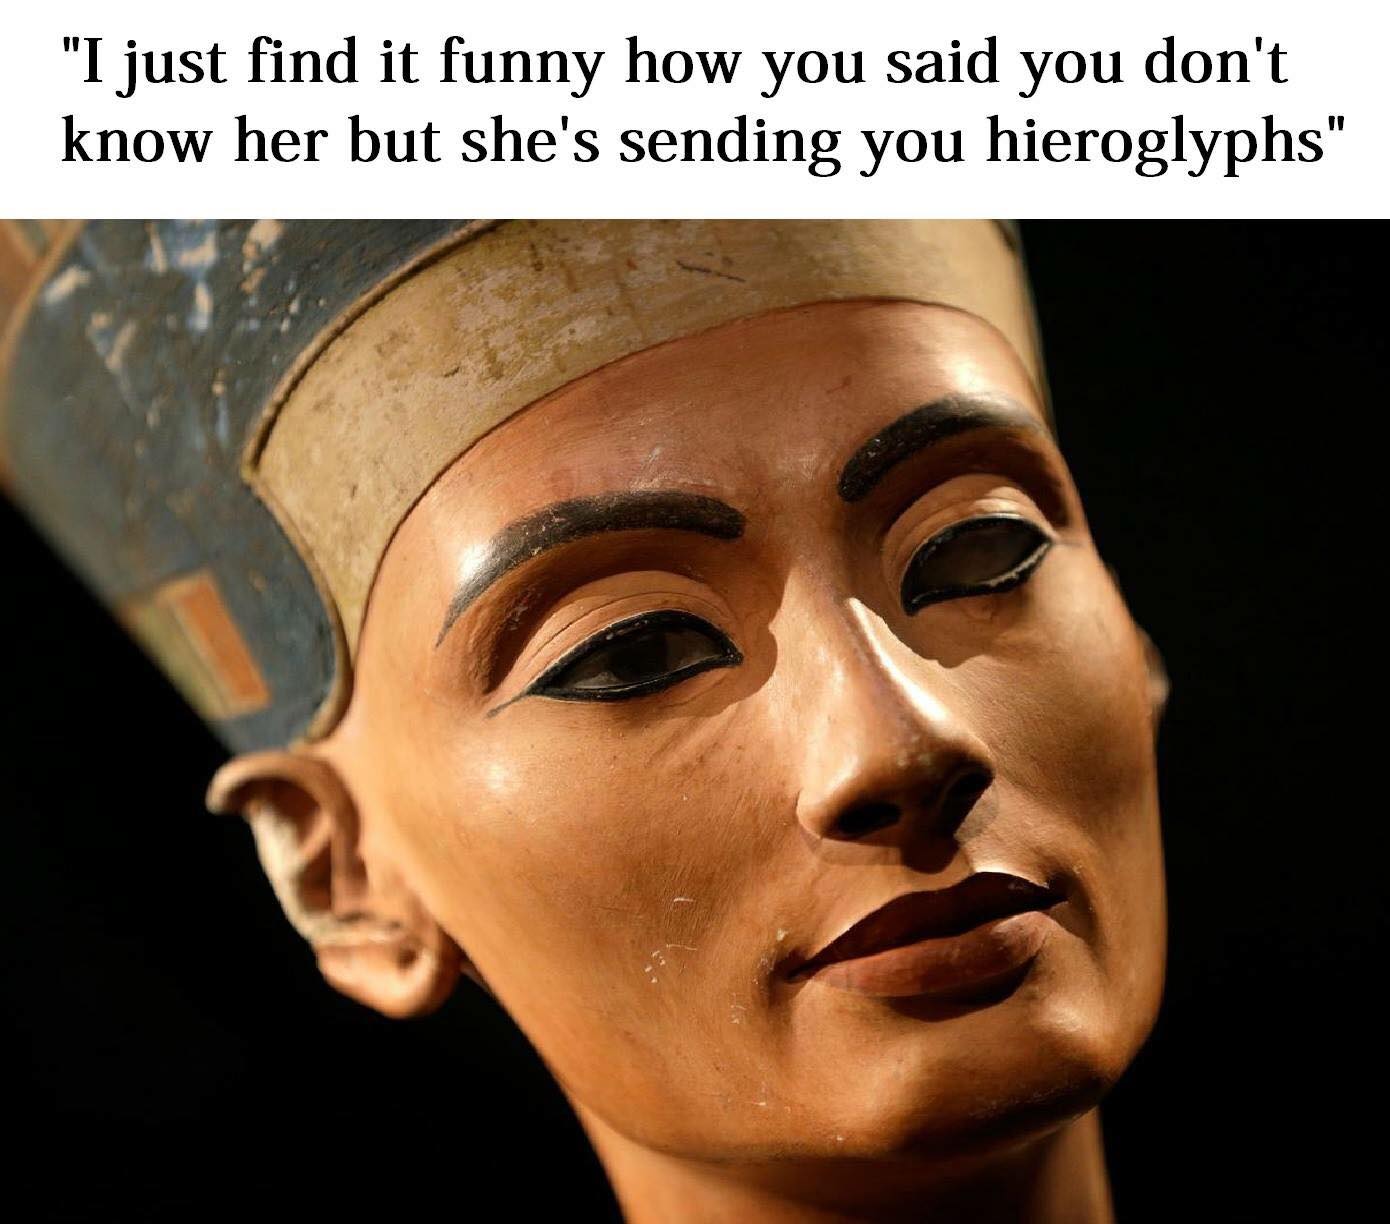 Funny meme about Egyptian goddess who just thinks its funny that you say you don't know her but she sending you hieroglyphs 